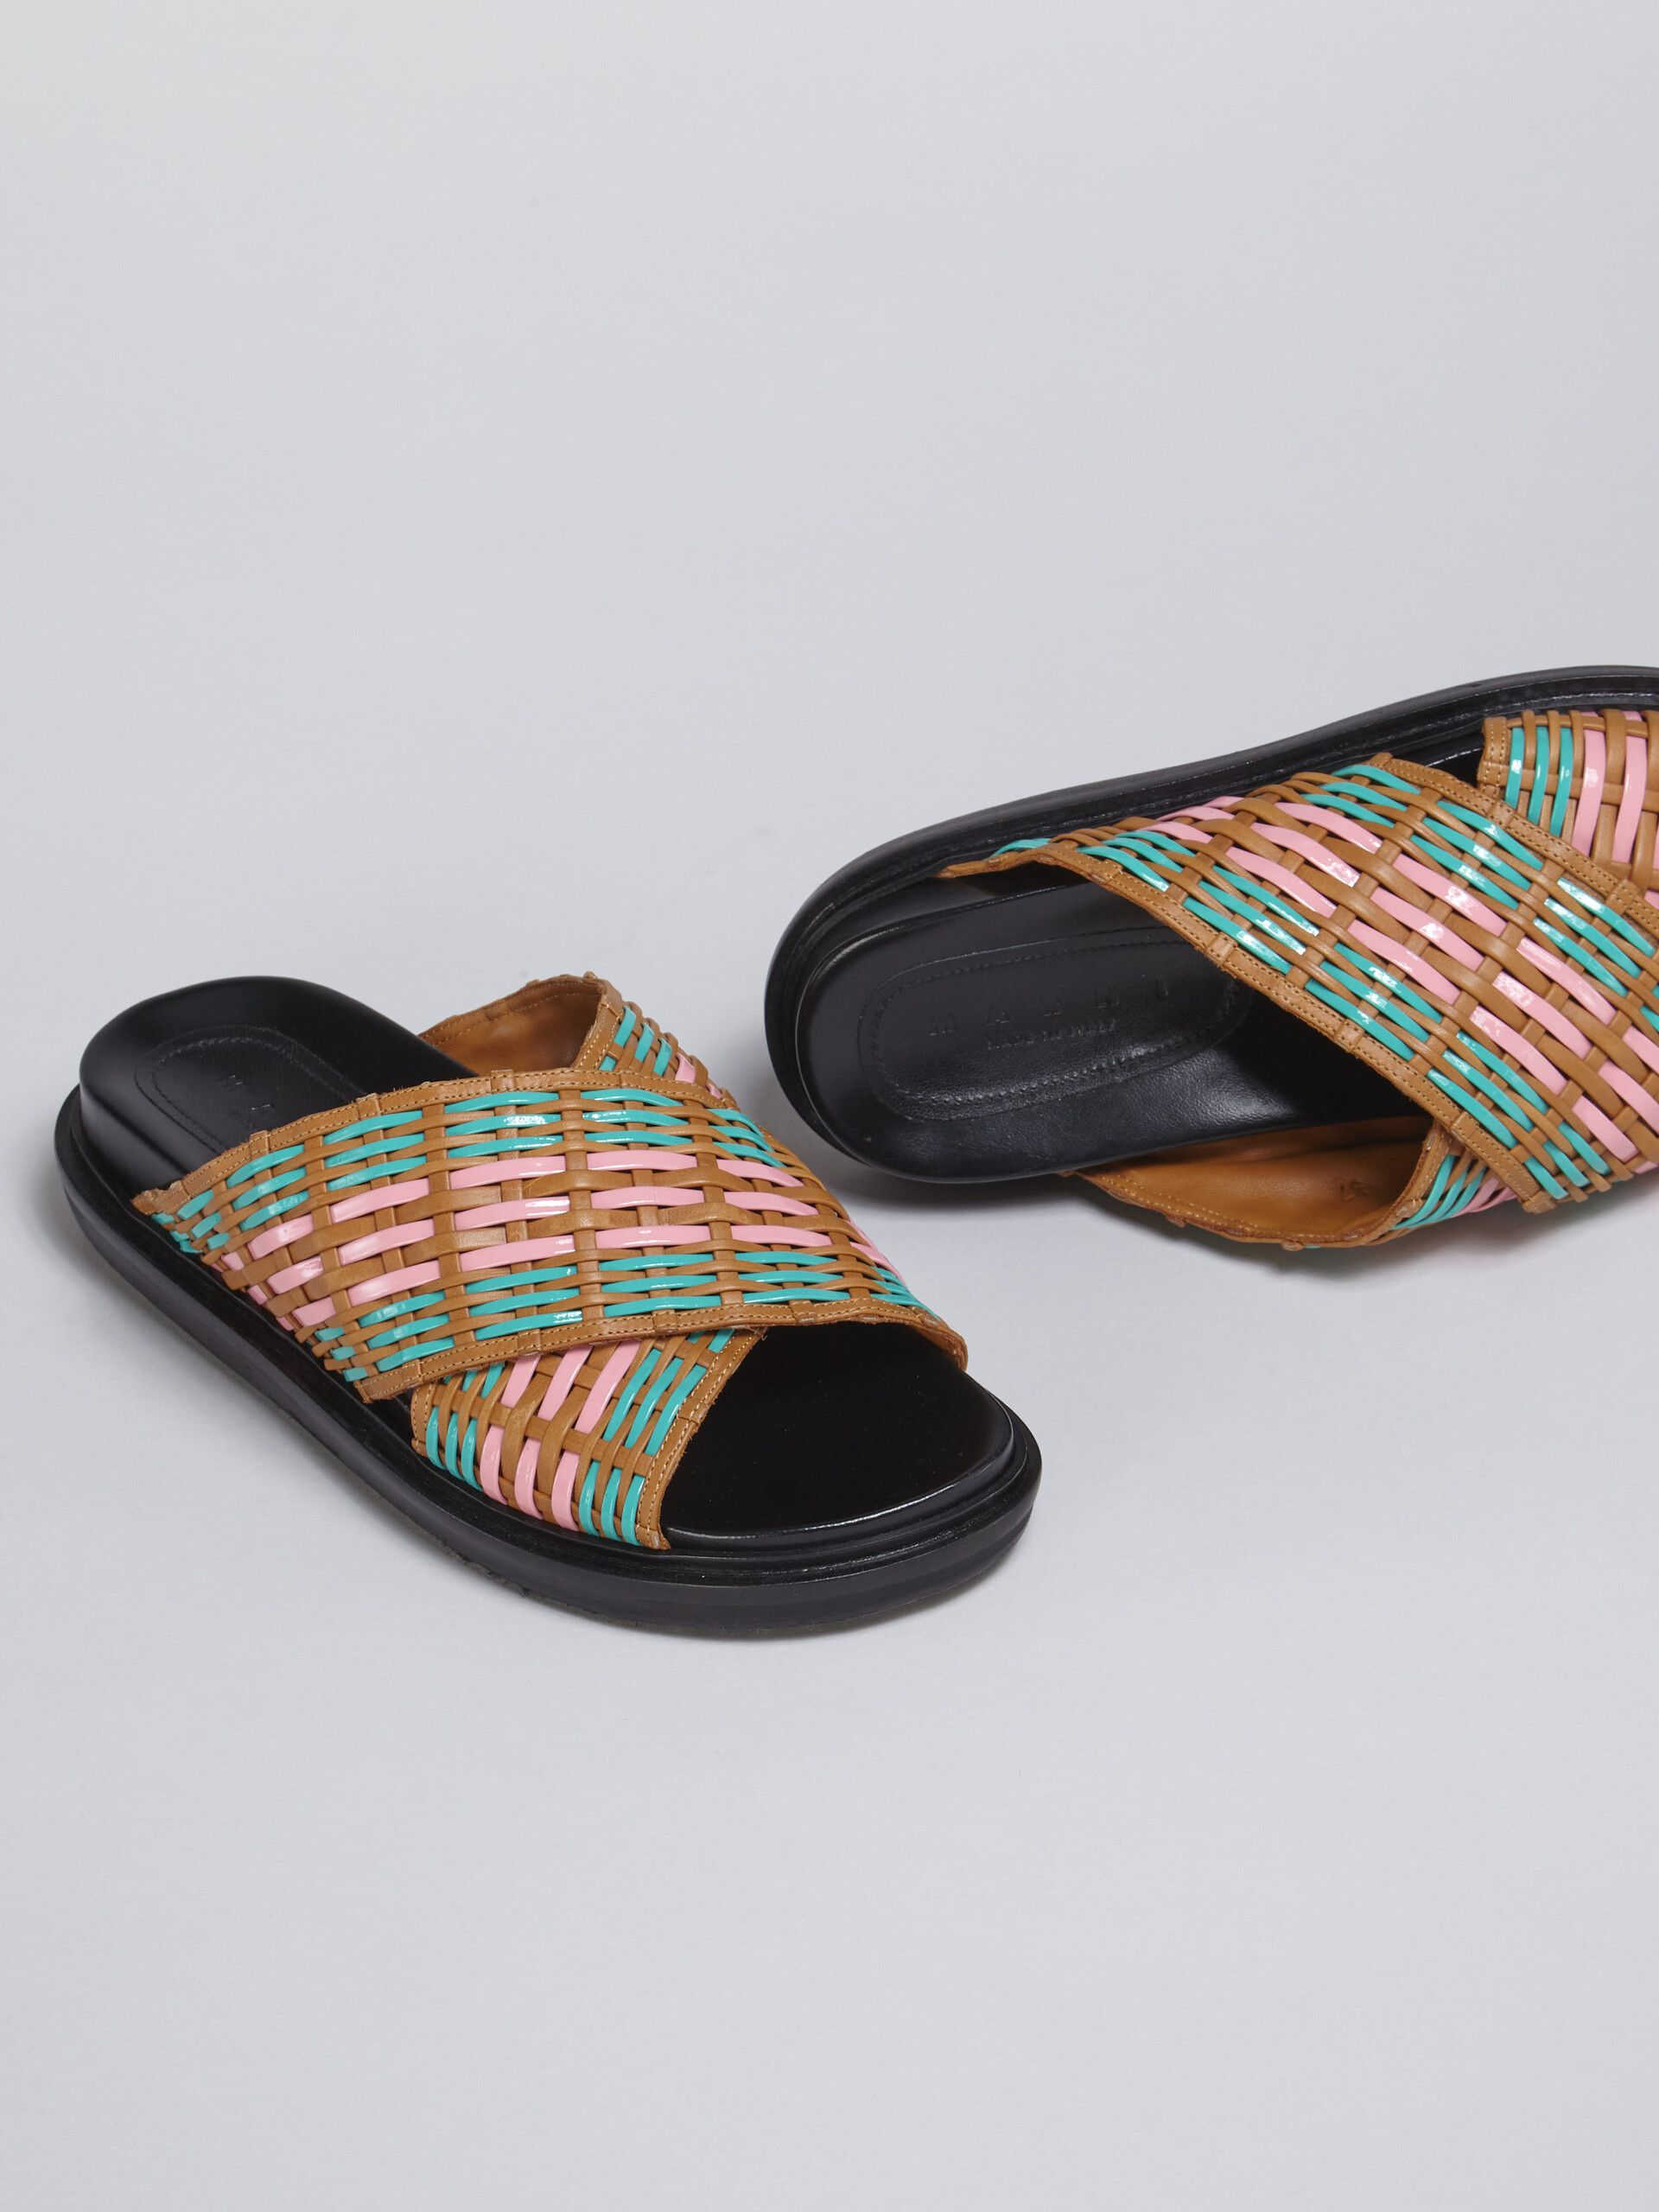 Woven leather Fussbett - Sandals - Image 4